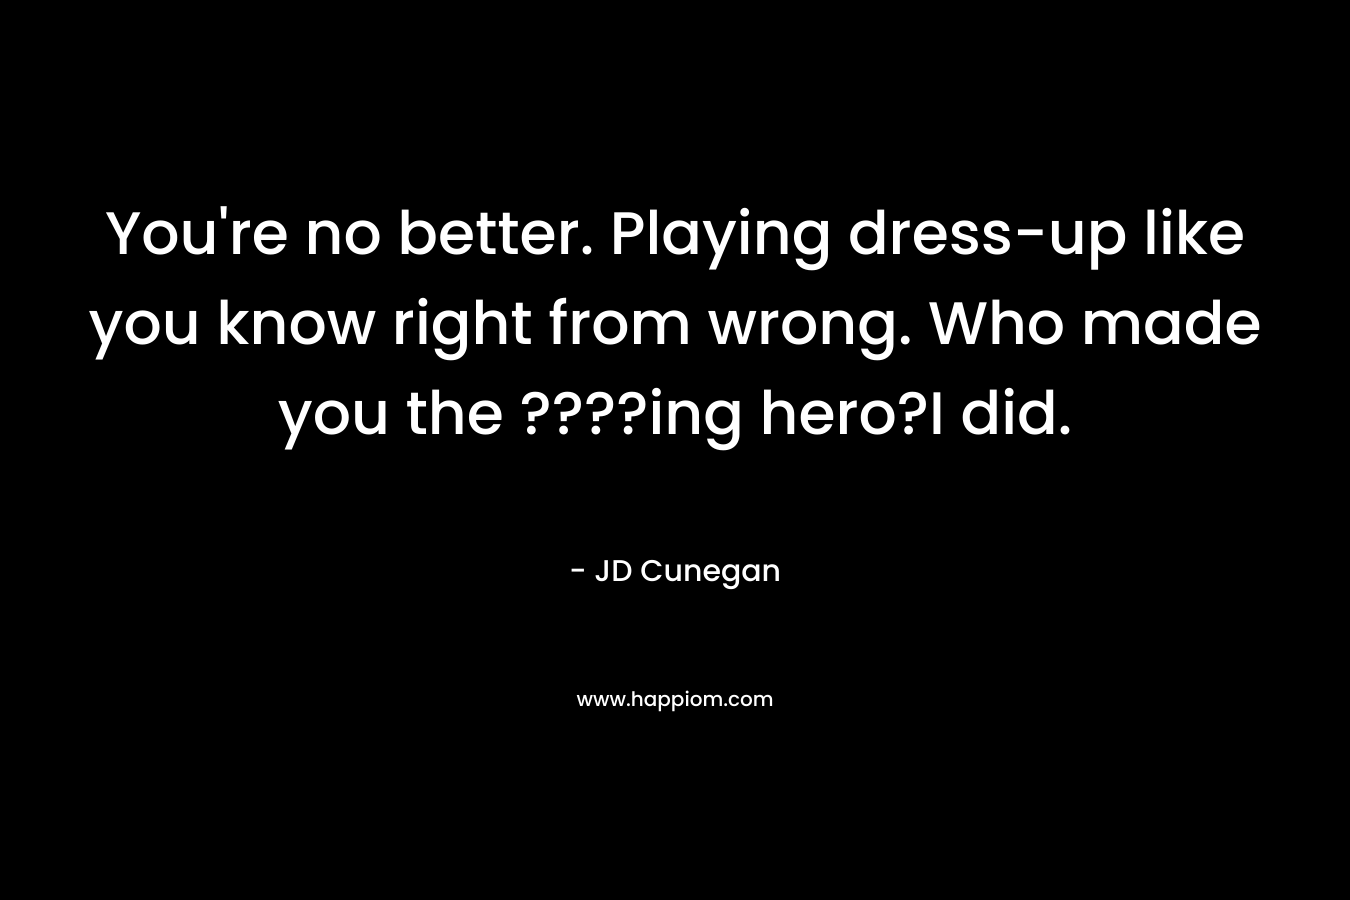 You're no better. Playing dress-up like you know right from wrong. Who made you the ????ing hero?I did.